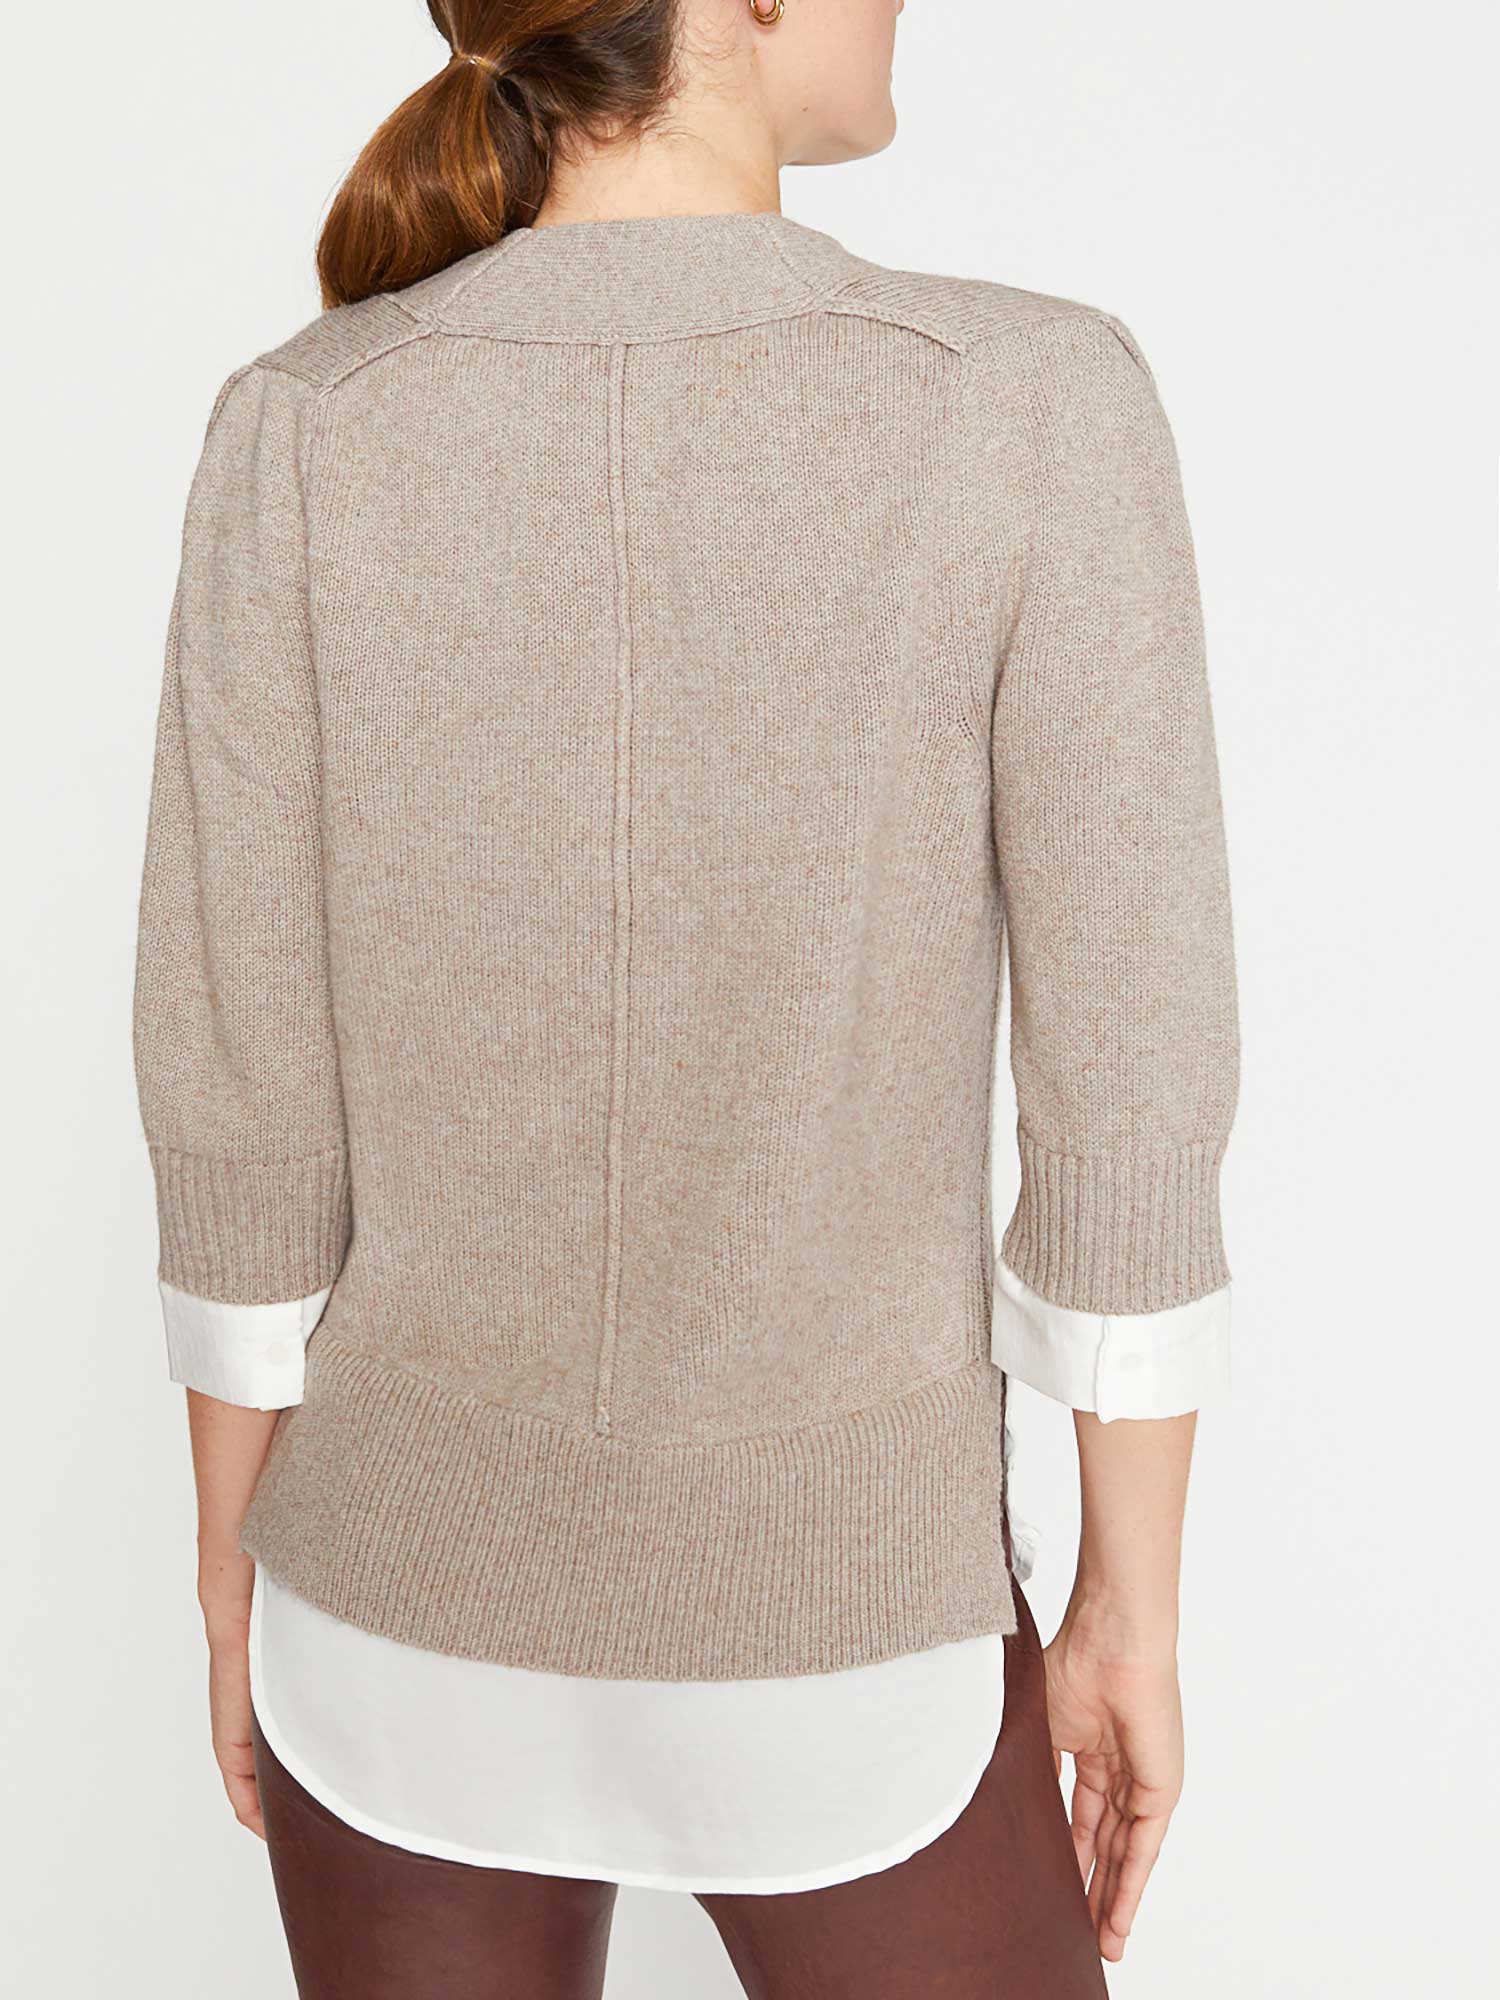 Lucie layered three-quarter sleeve v-neck sweater back view